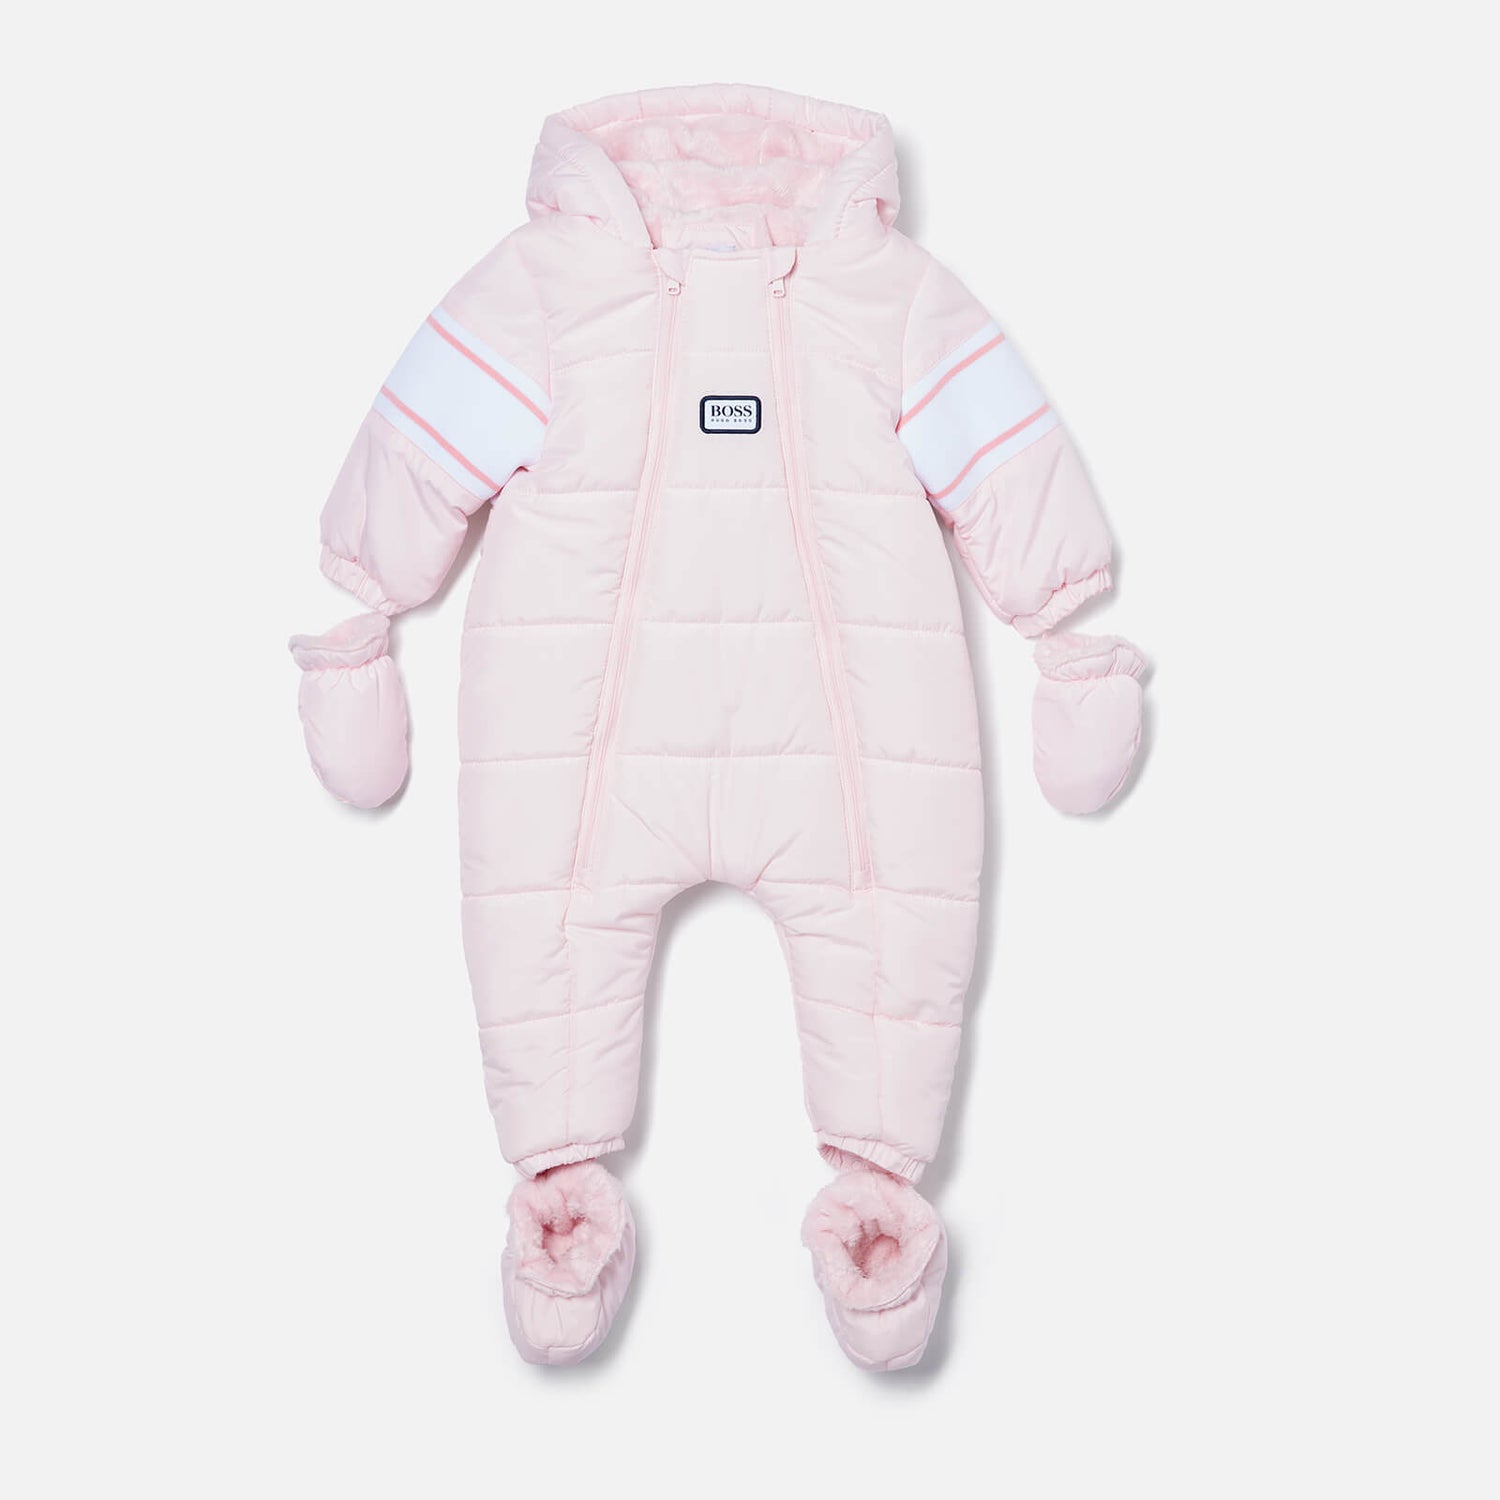 Hugo Boss Baby All In One Snowsuit - Pink Pale